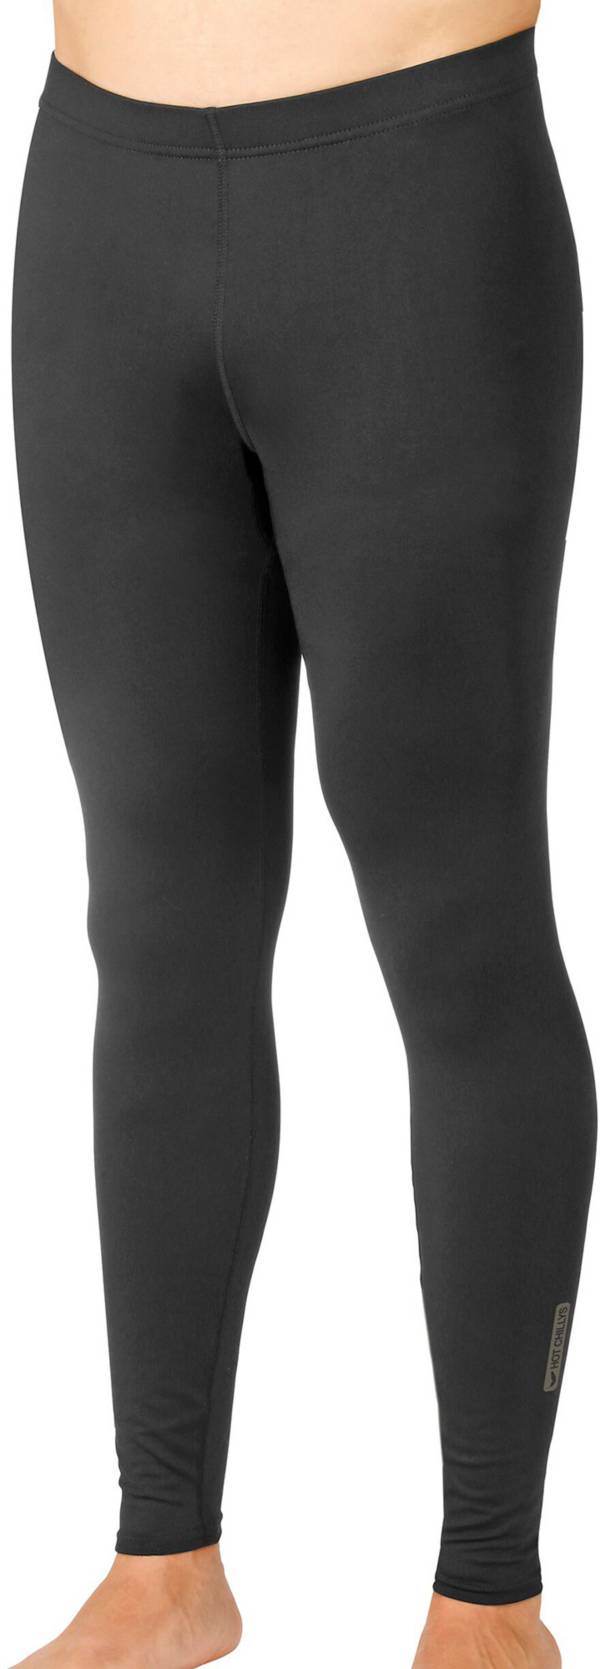 Body Fit Hot Chillys Women's Micro-Elite Chamois Tight HC9412 Mid Weight Blk 